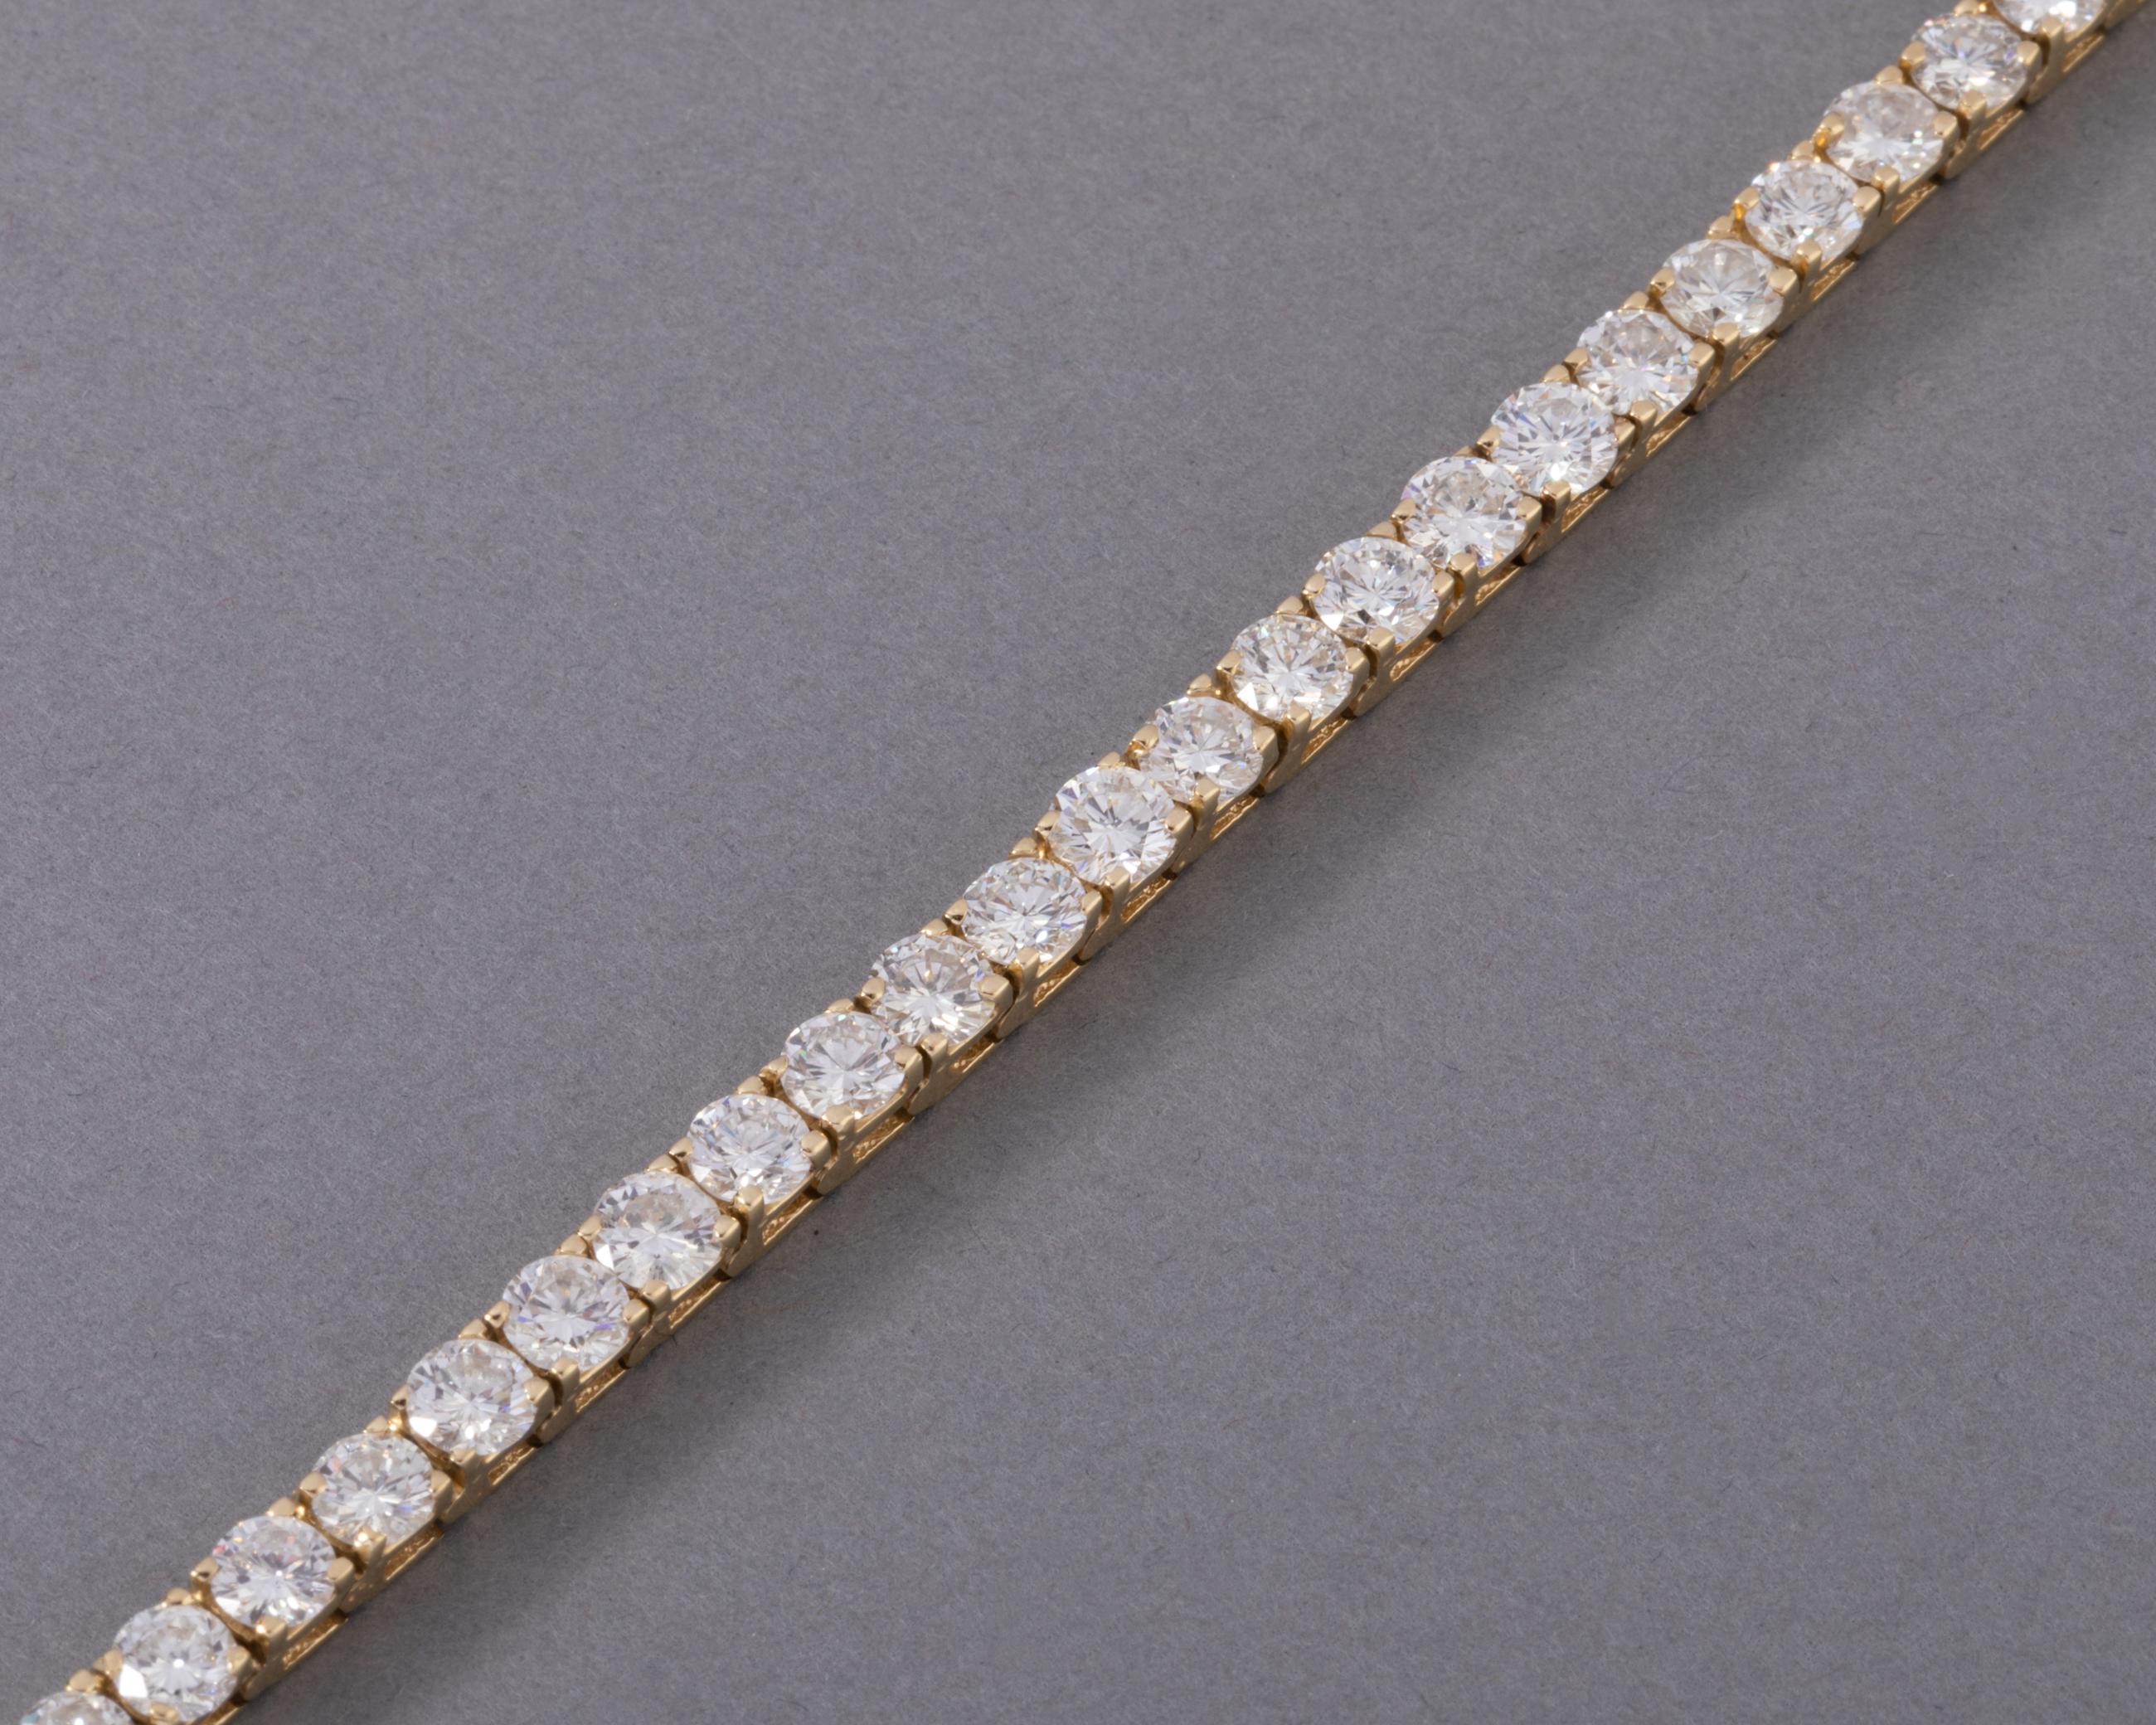 One very beautiful bracelet. Made in yellow gold 14k.
The diamonds weights 9/10 carats approximately. The diamonds are white color, quality is H Vs2 / SiI1 clarity.
The length is 18 cm.
Total weight 13 grams